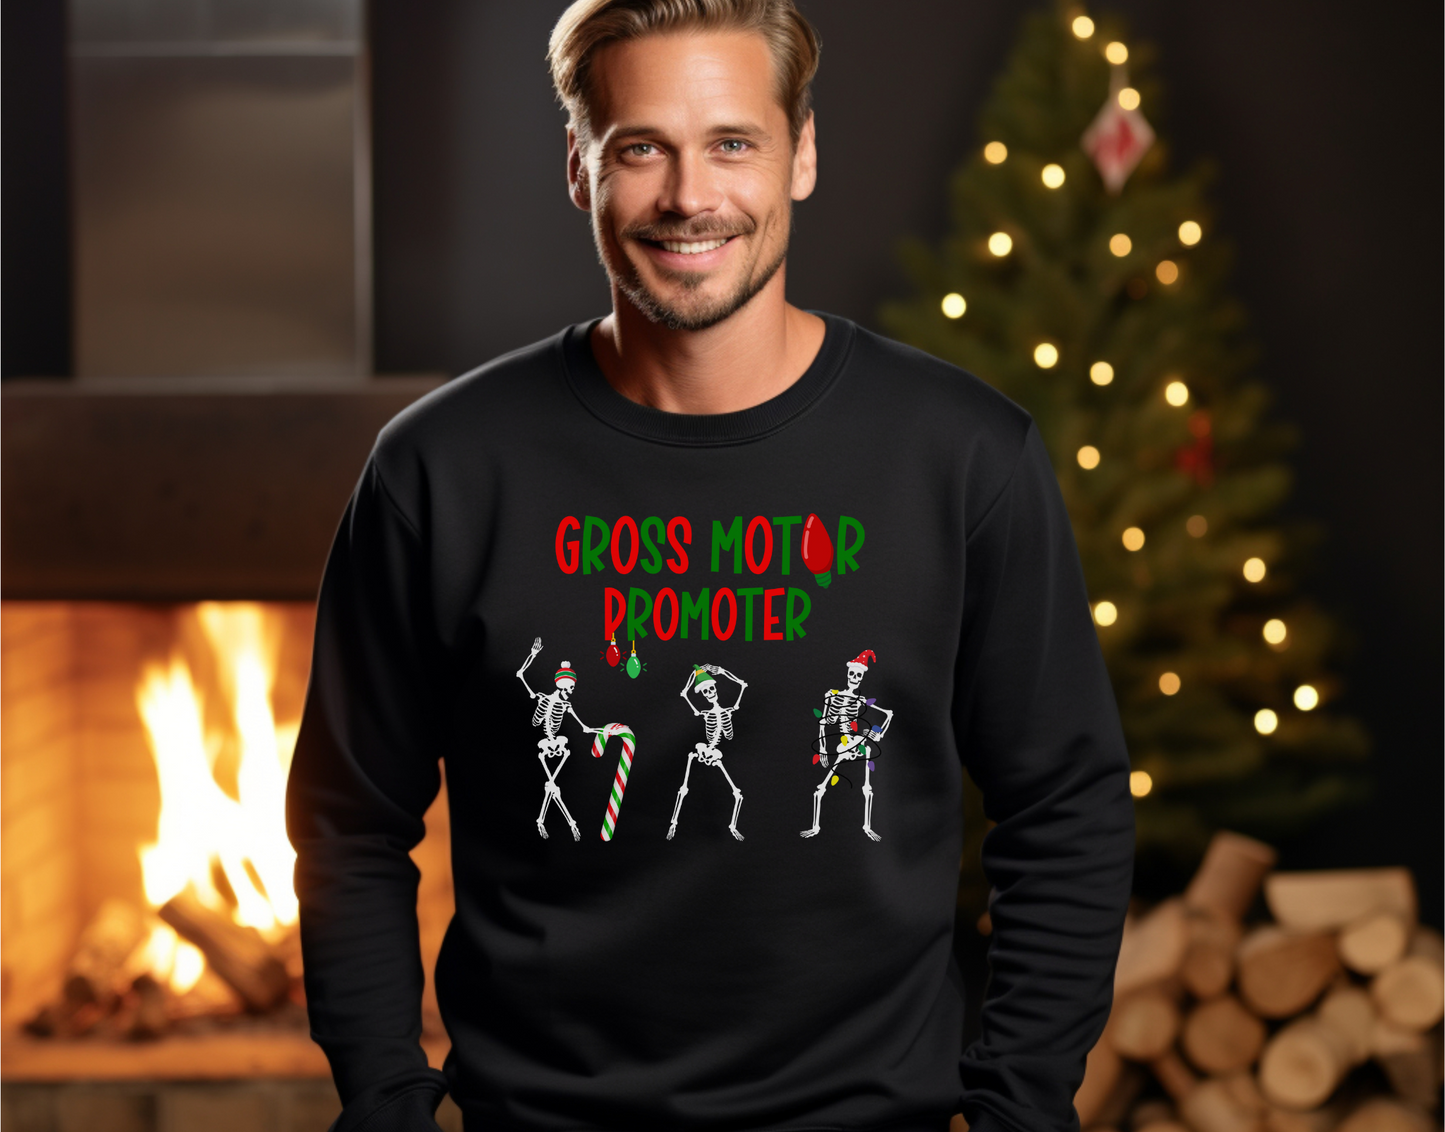 Gross Motor Promoter Physical Therapy Crewneck Sweatshirt